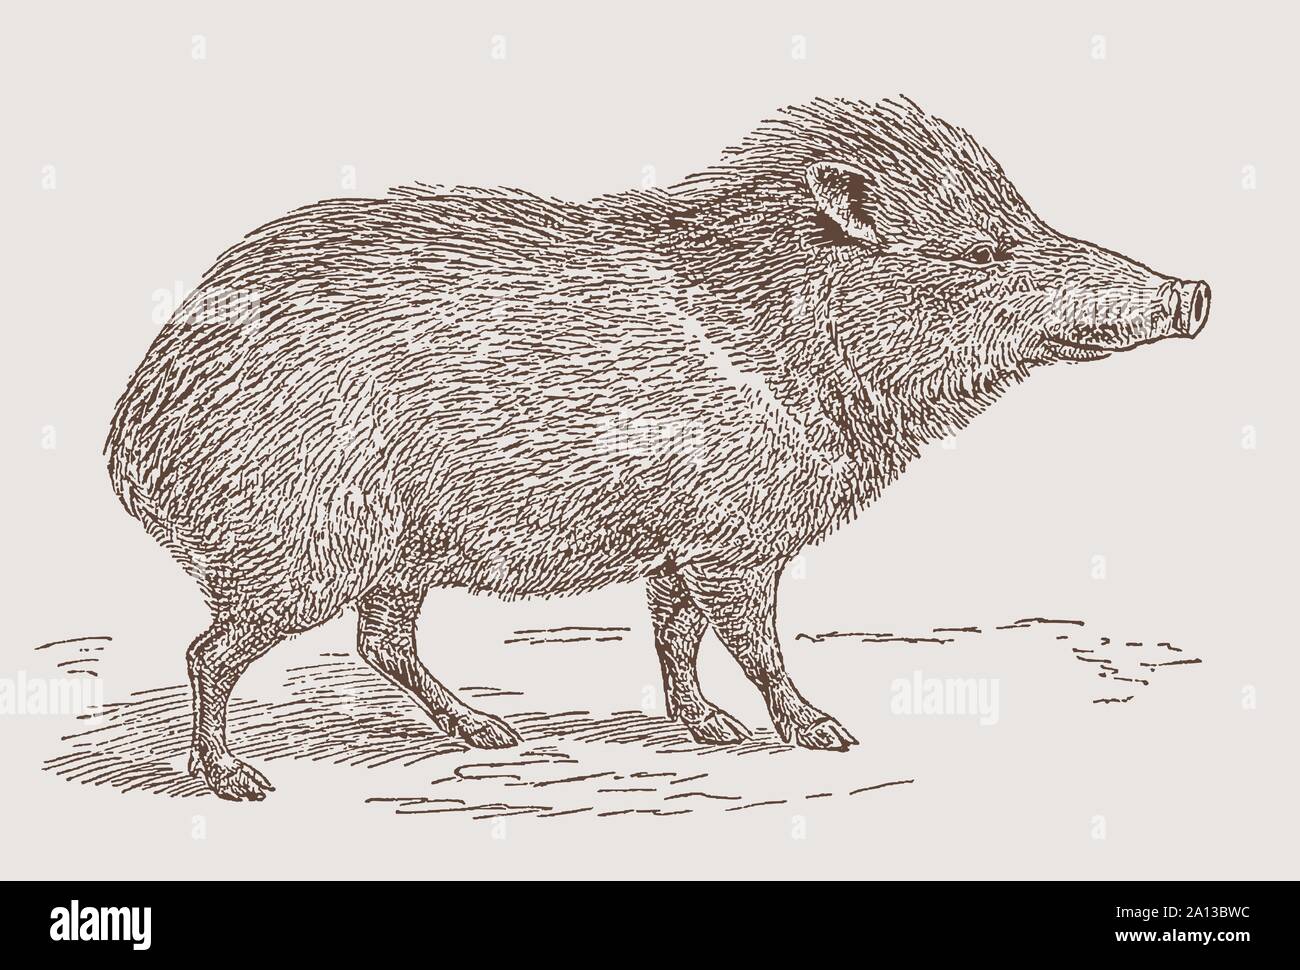 Collared peccary (pecari tajacu) in side view. Illustration after an engraving from the 19th century Stock Vector